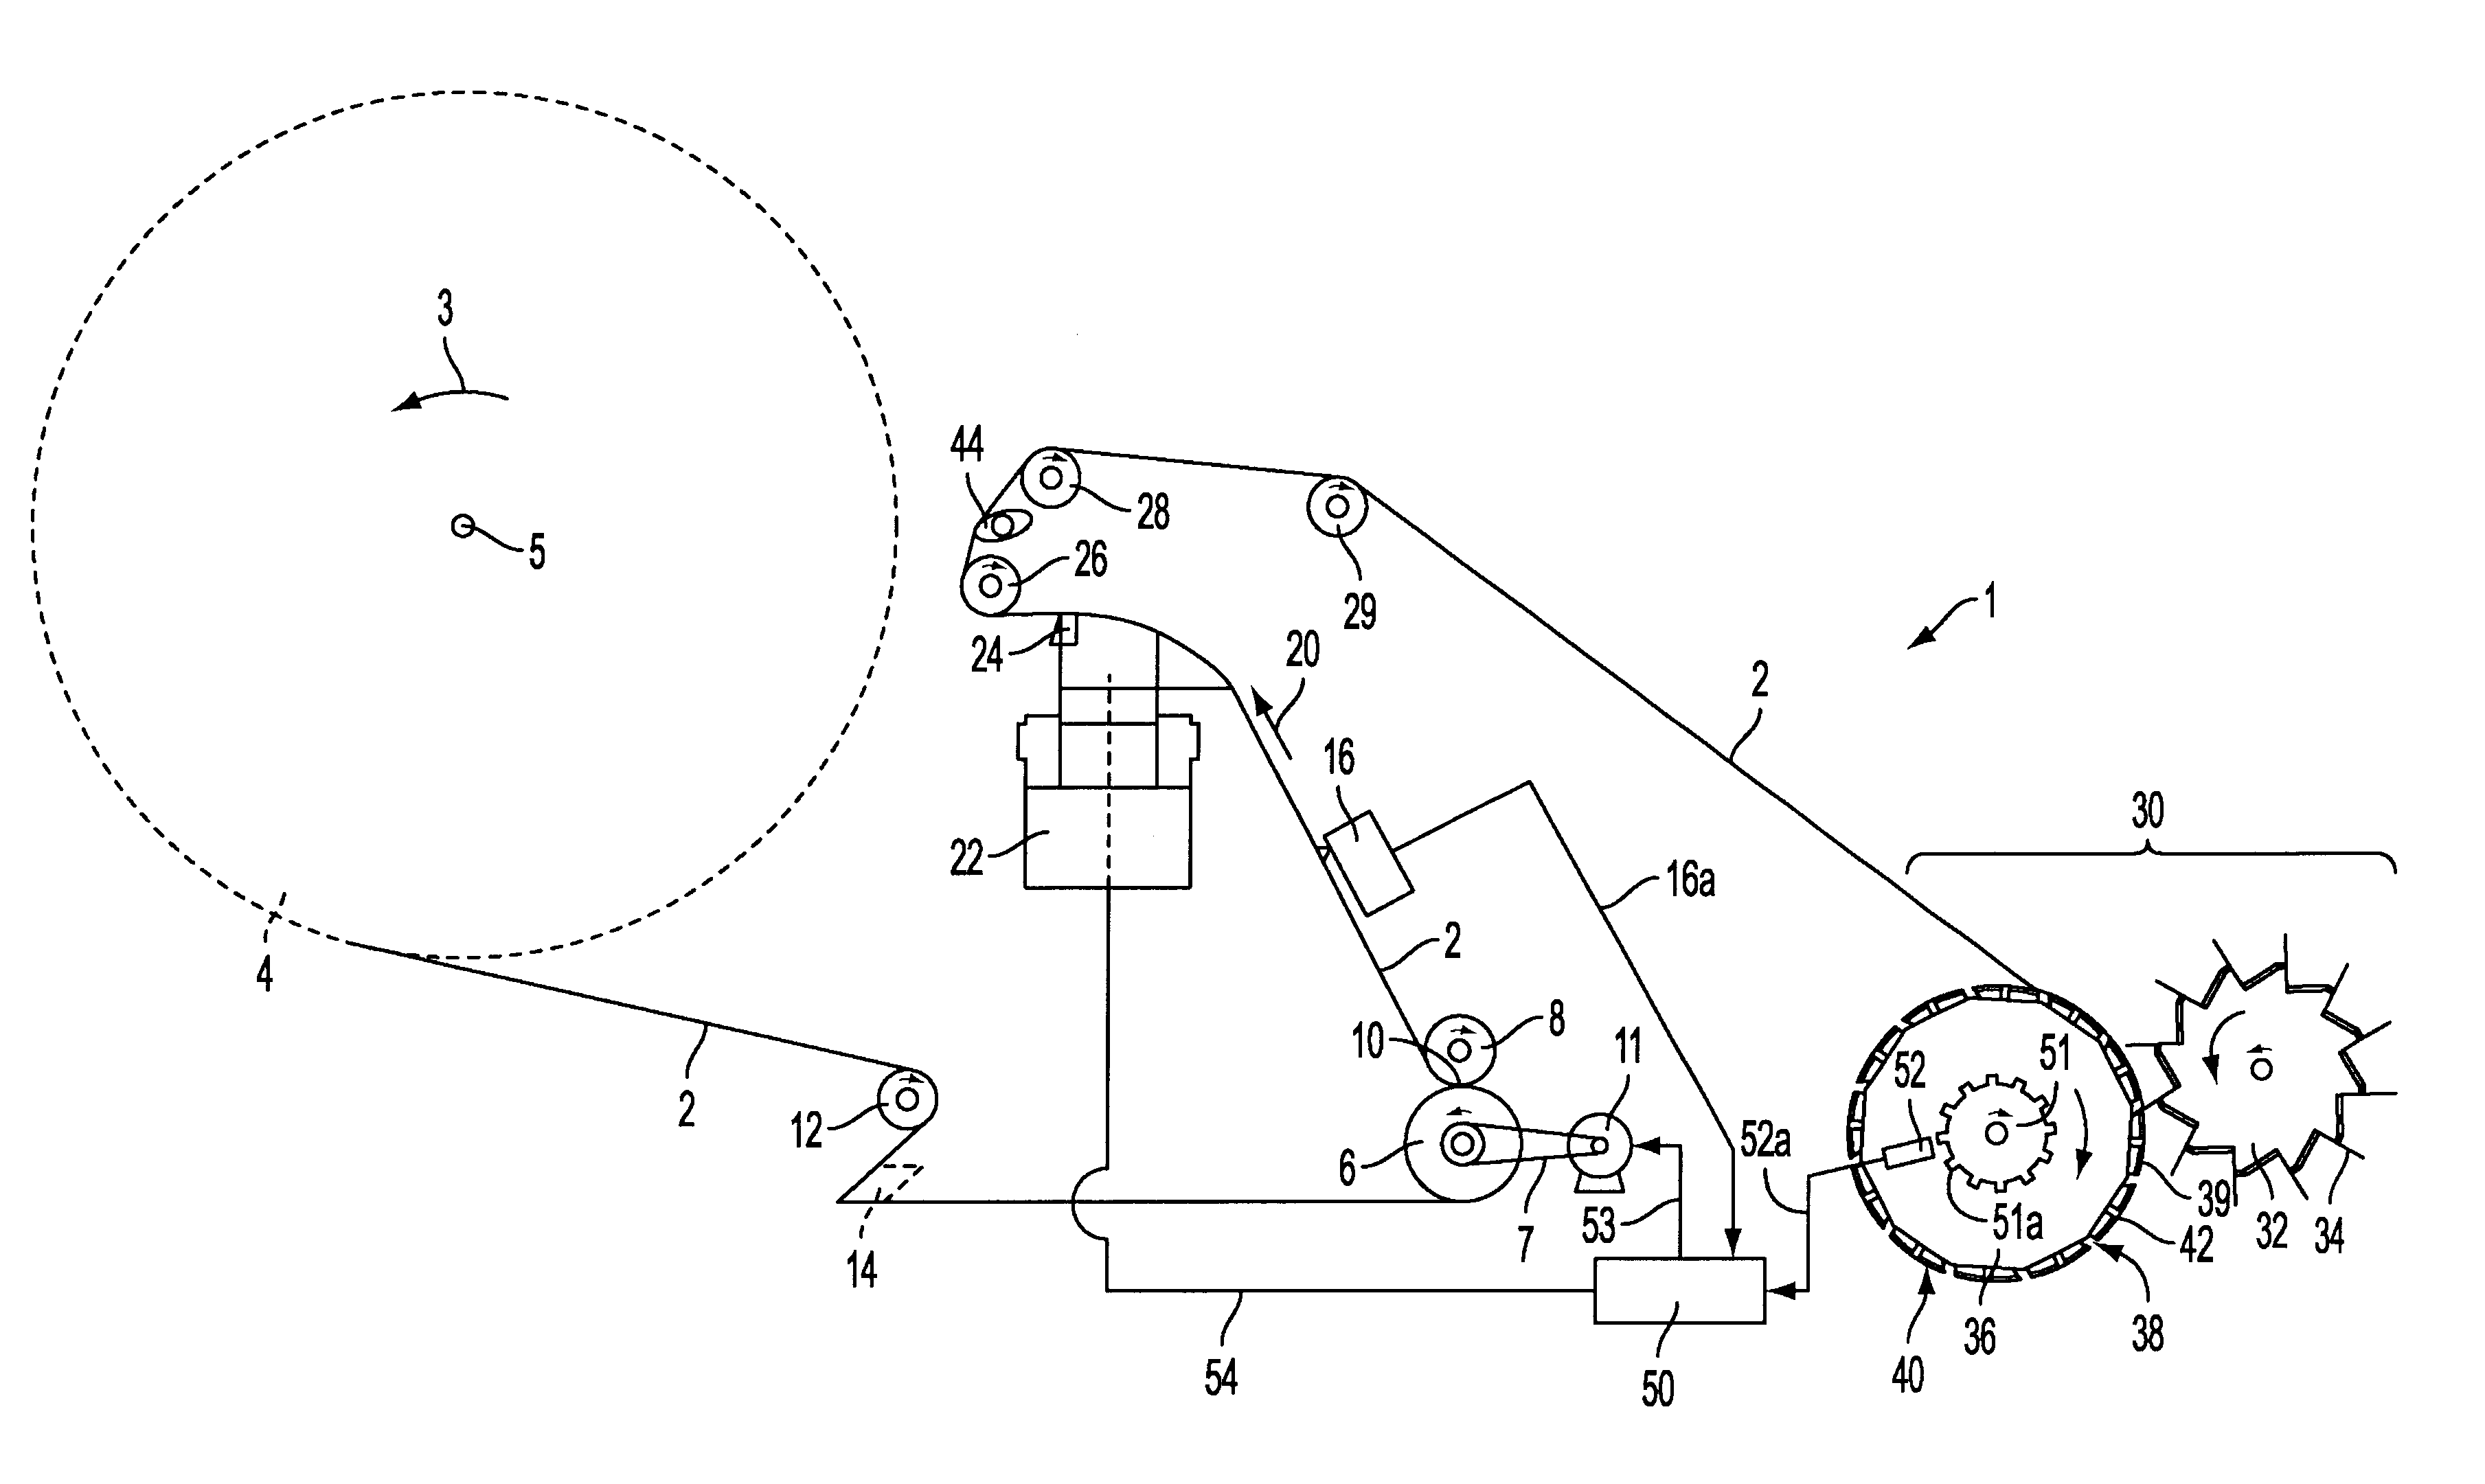 Apparatus for applying adhesive to a running web of wrapping material for smokers products